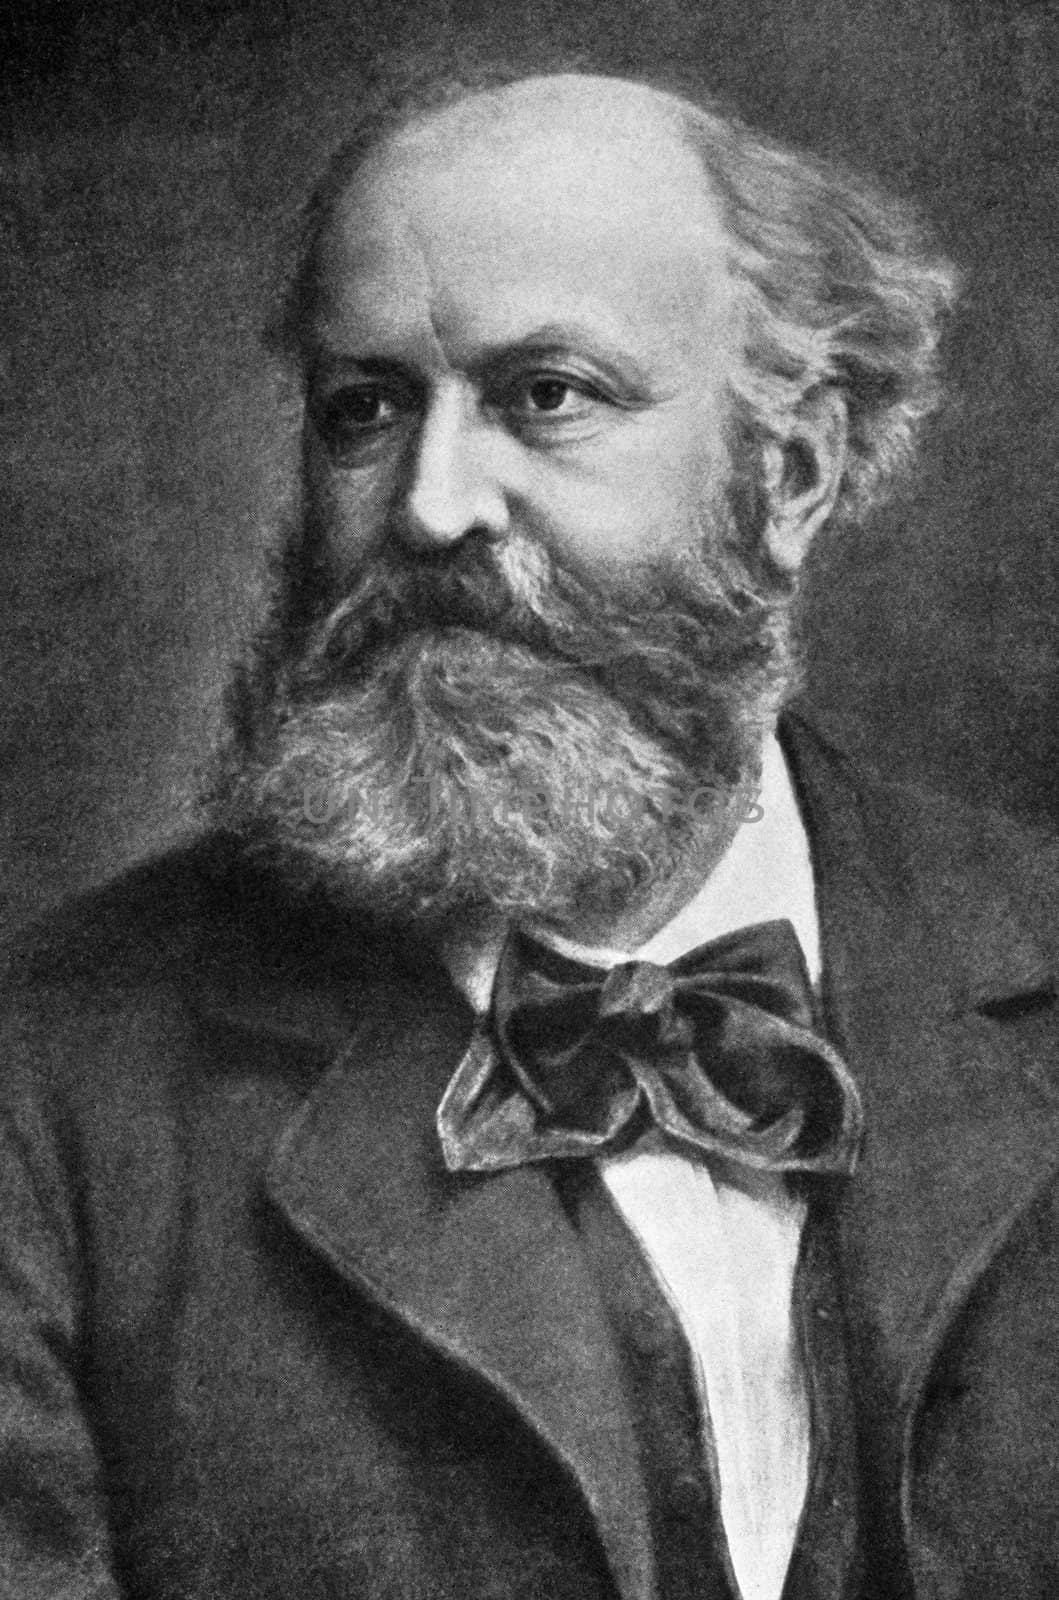 Charles Gounod (1818-1893) on engraving from 1908. French composer best known for his Ave Maria as well as his operas Faust and Romeo & Juliet. Engraved by unknown artist and published in "The world's best music, famous compositions for the piano. Volume 2", by The University Society, New York,1908.